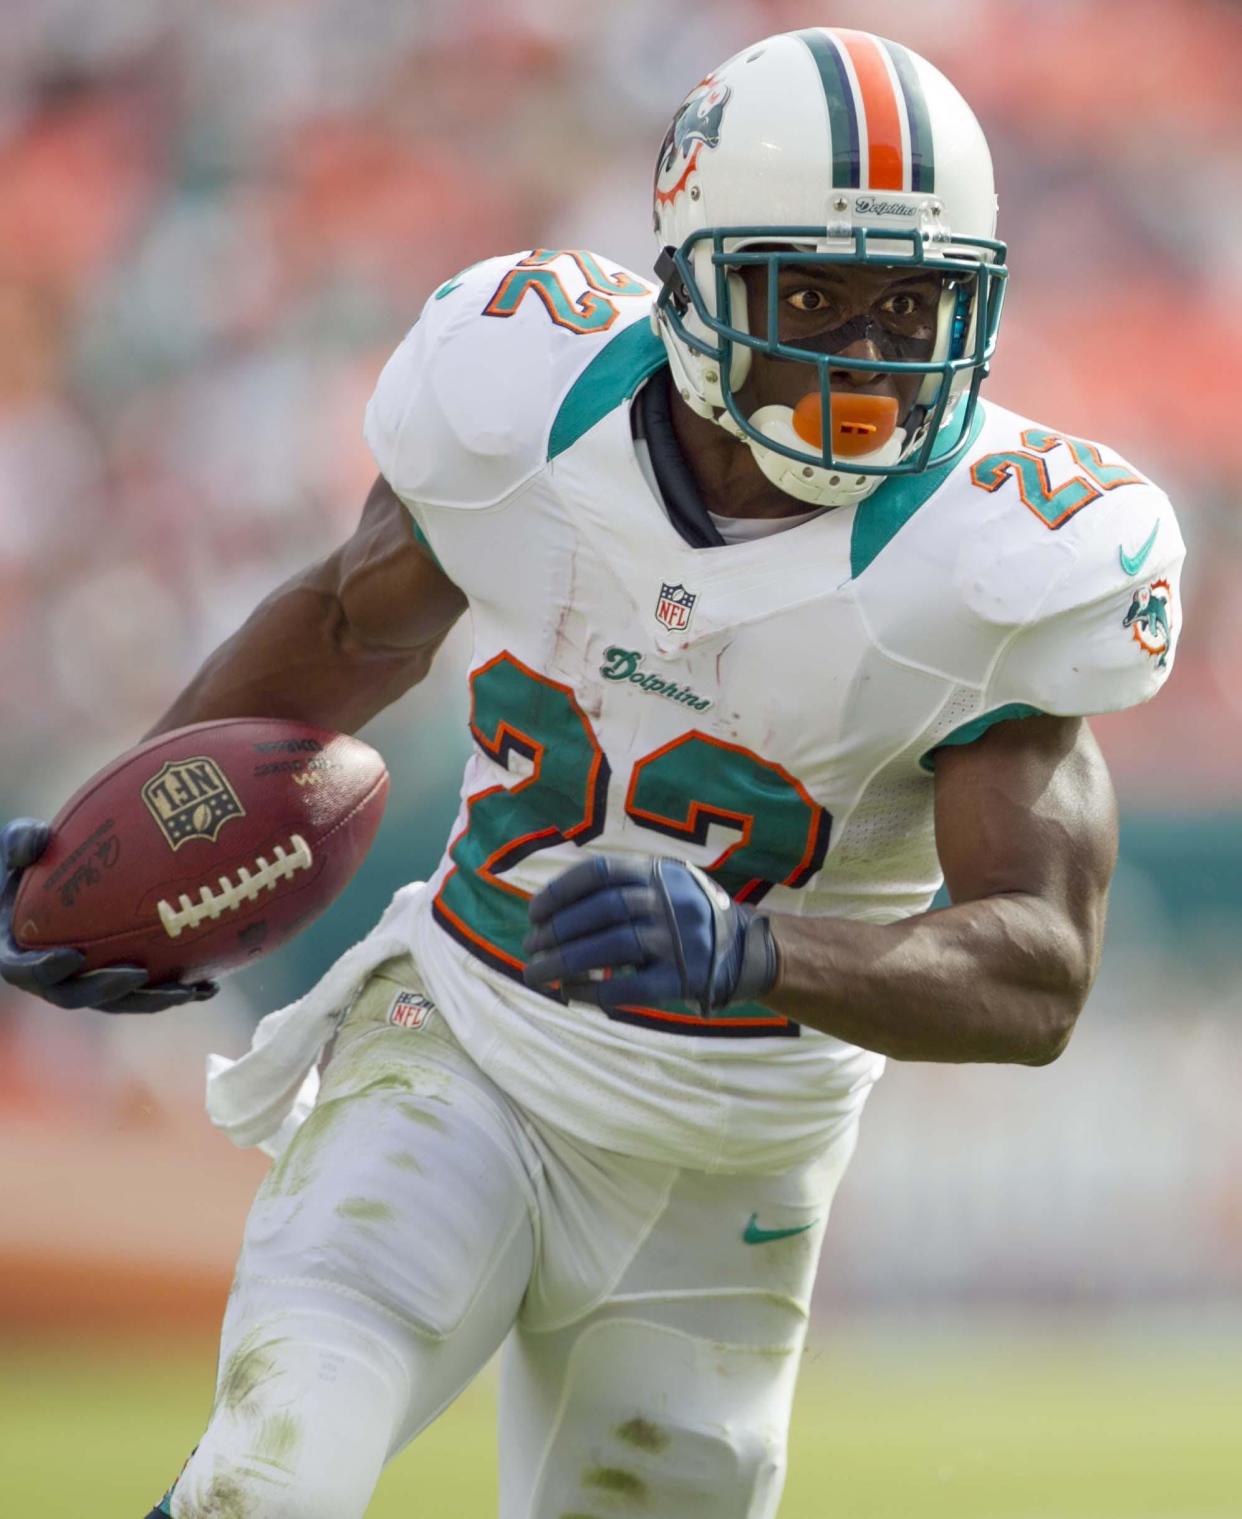 Running back Reggie Bush (22) was an all-purpose threat for the Dolphins.